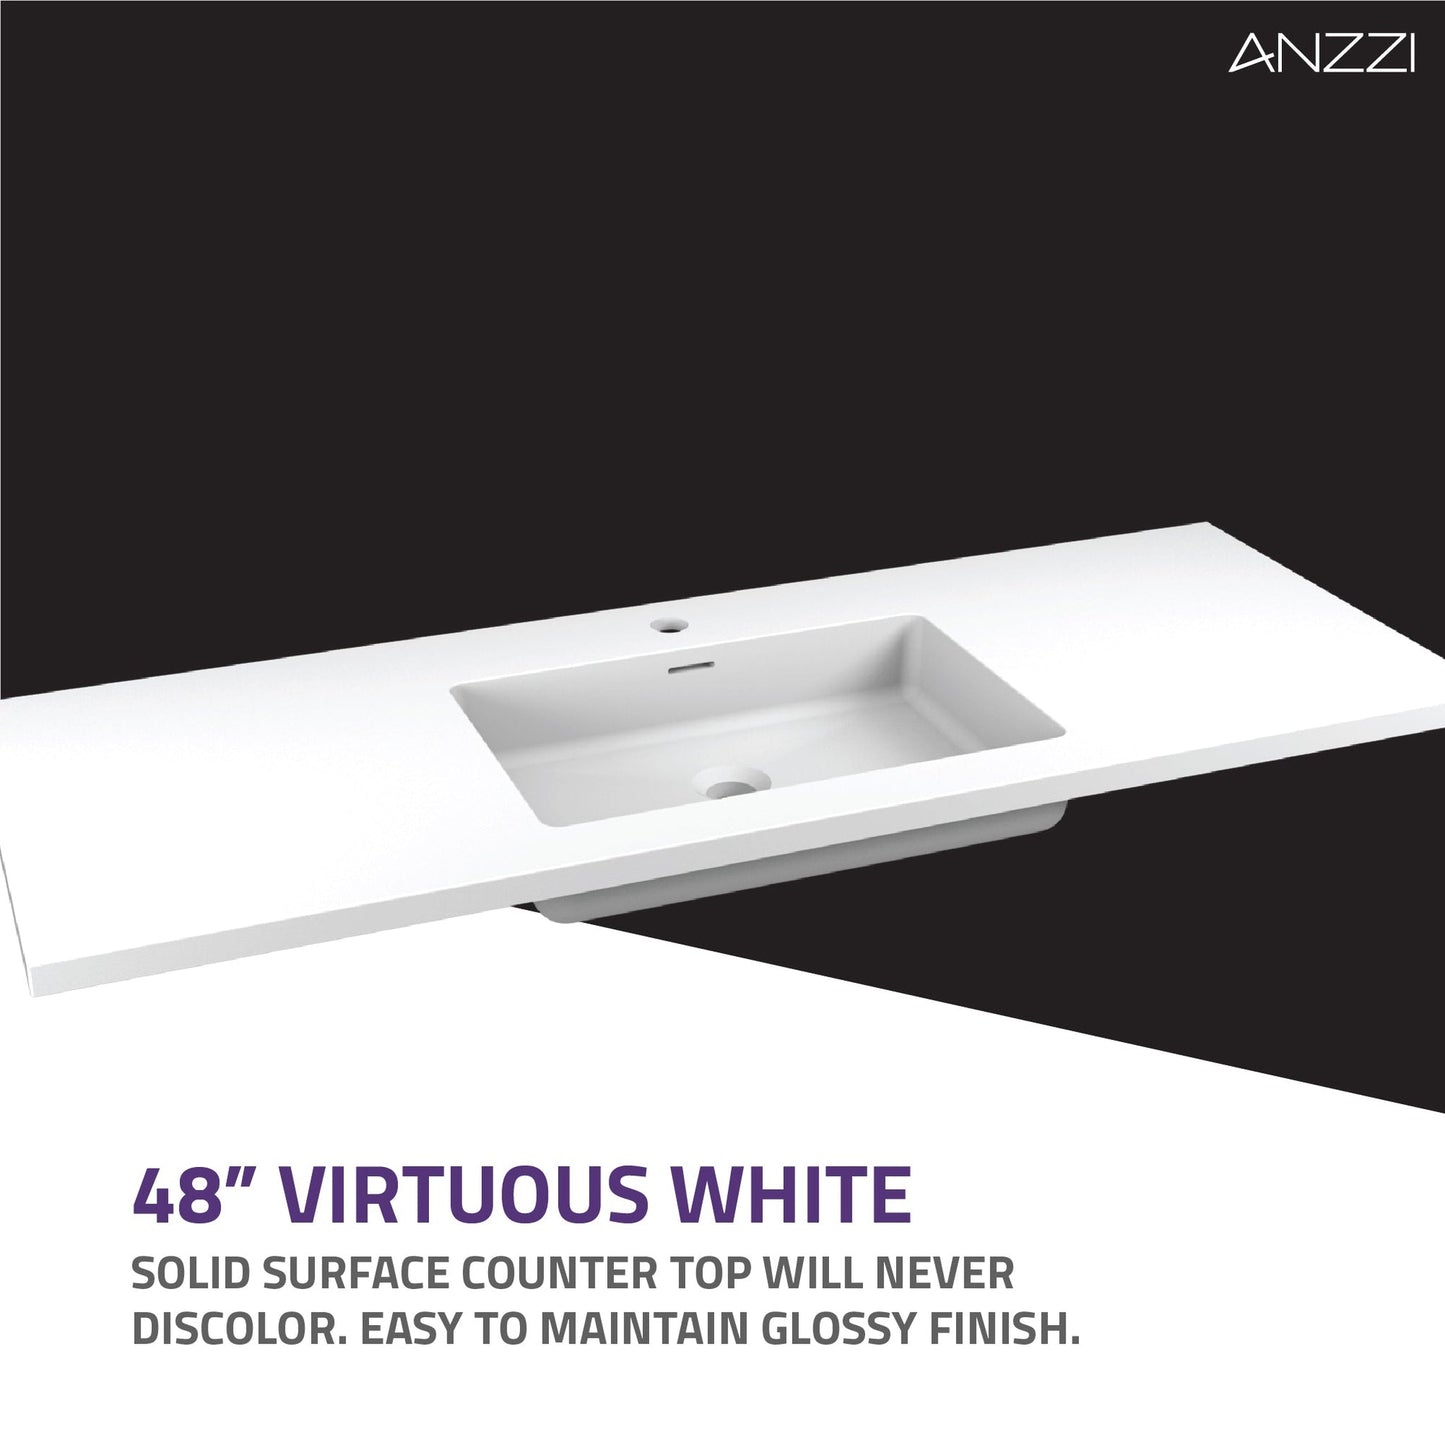 ANZZI Conques 48" x 20" Rich White Solid Wood Bathroom Vanity With Glossy White Countertop With Sink and 36" LED Mirror